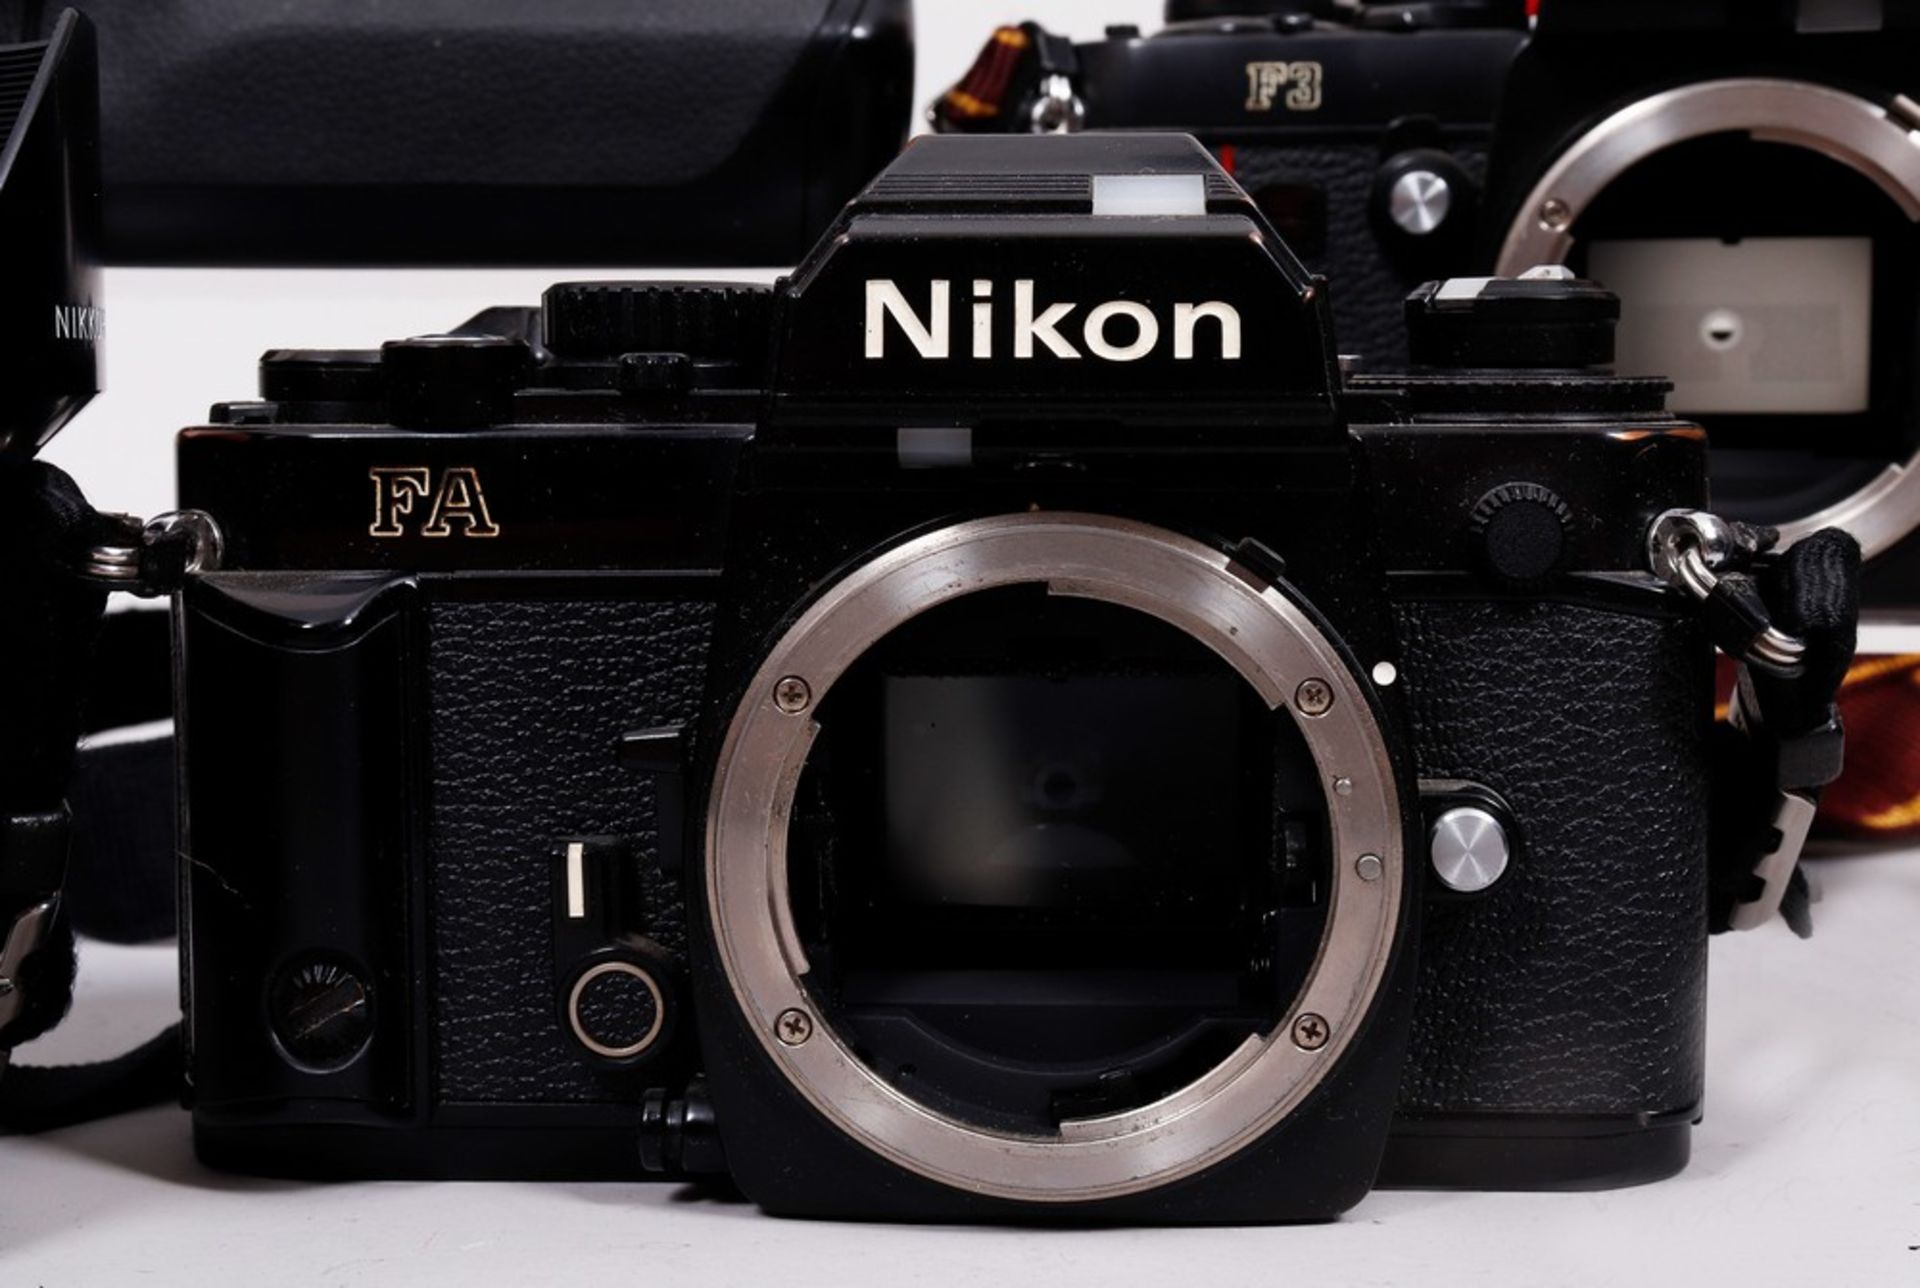 Mixed lot of SLR cameras and accessories, Nikon, Japan, 1980s/90s, approx. 16 pieces - Image 4 of 7